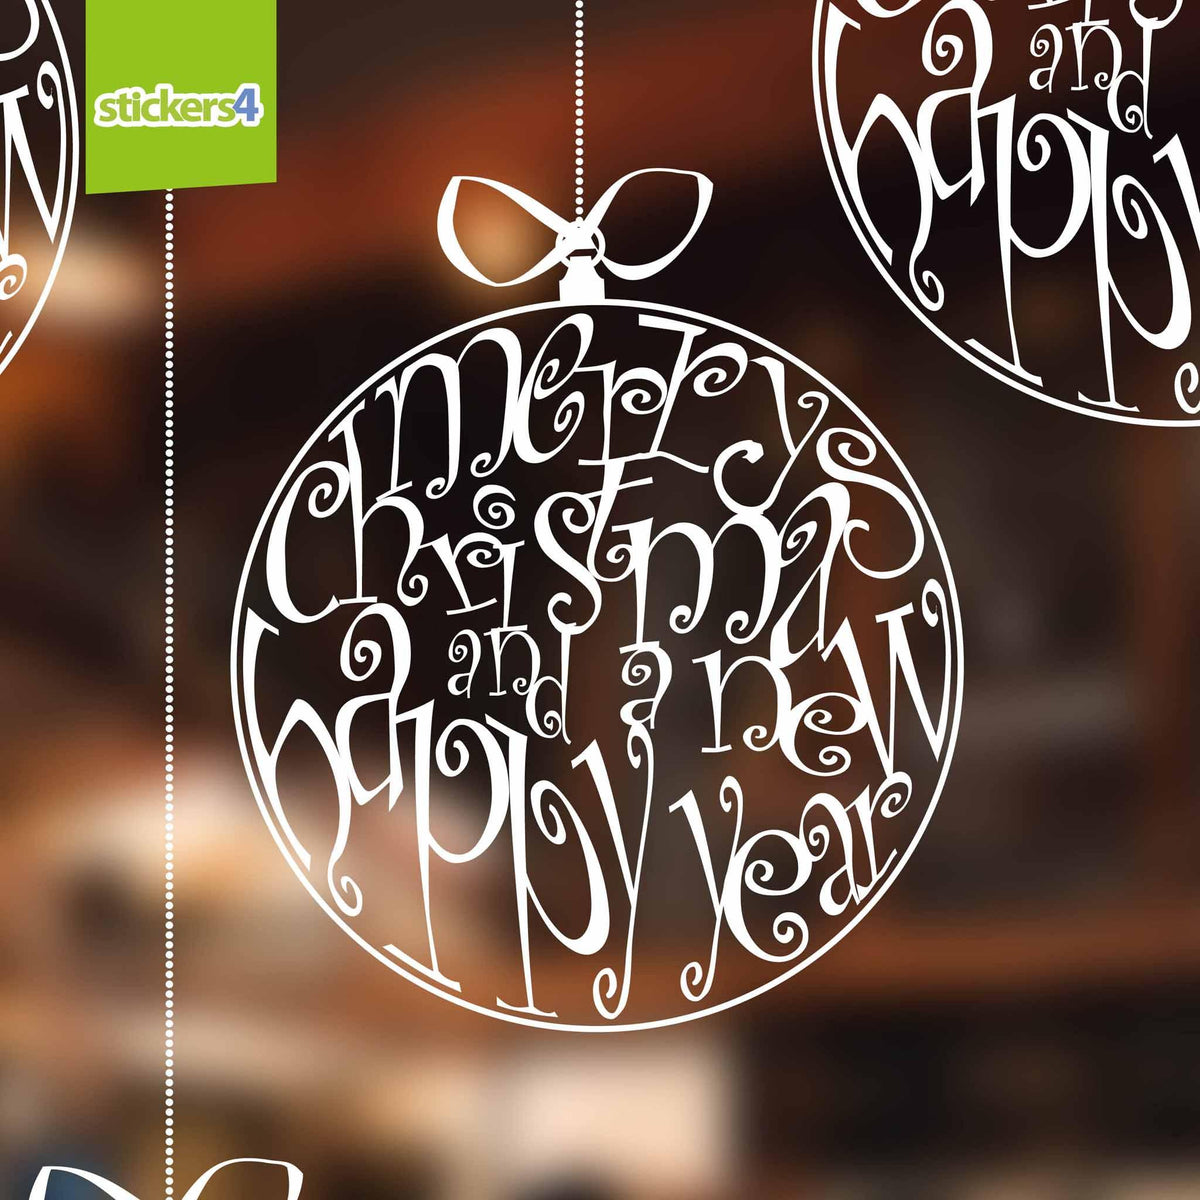 Set of 6 Extra-Large (300mm) Merry Christmas Bauble Window Stickers Christmas Window Display